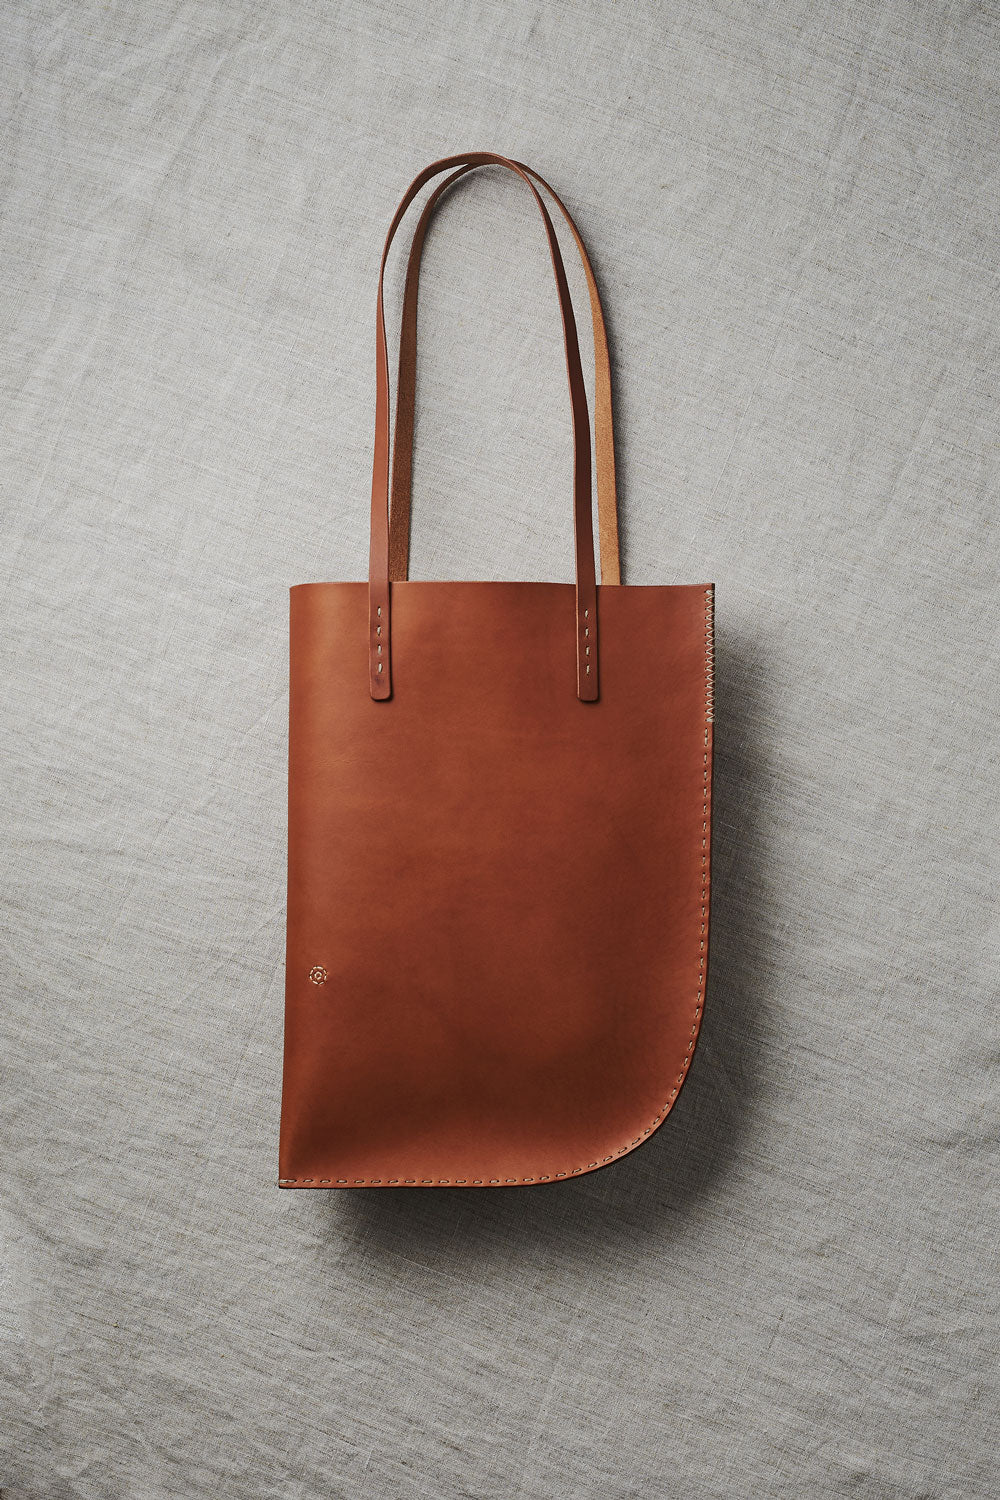 roots 根 / tote bag